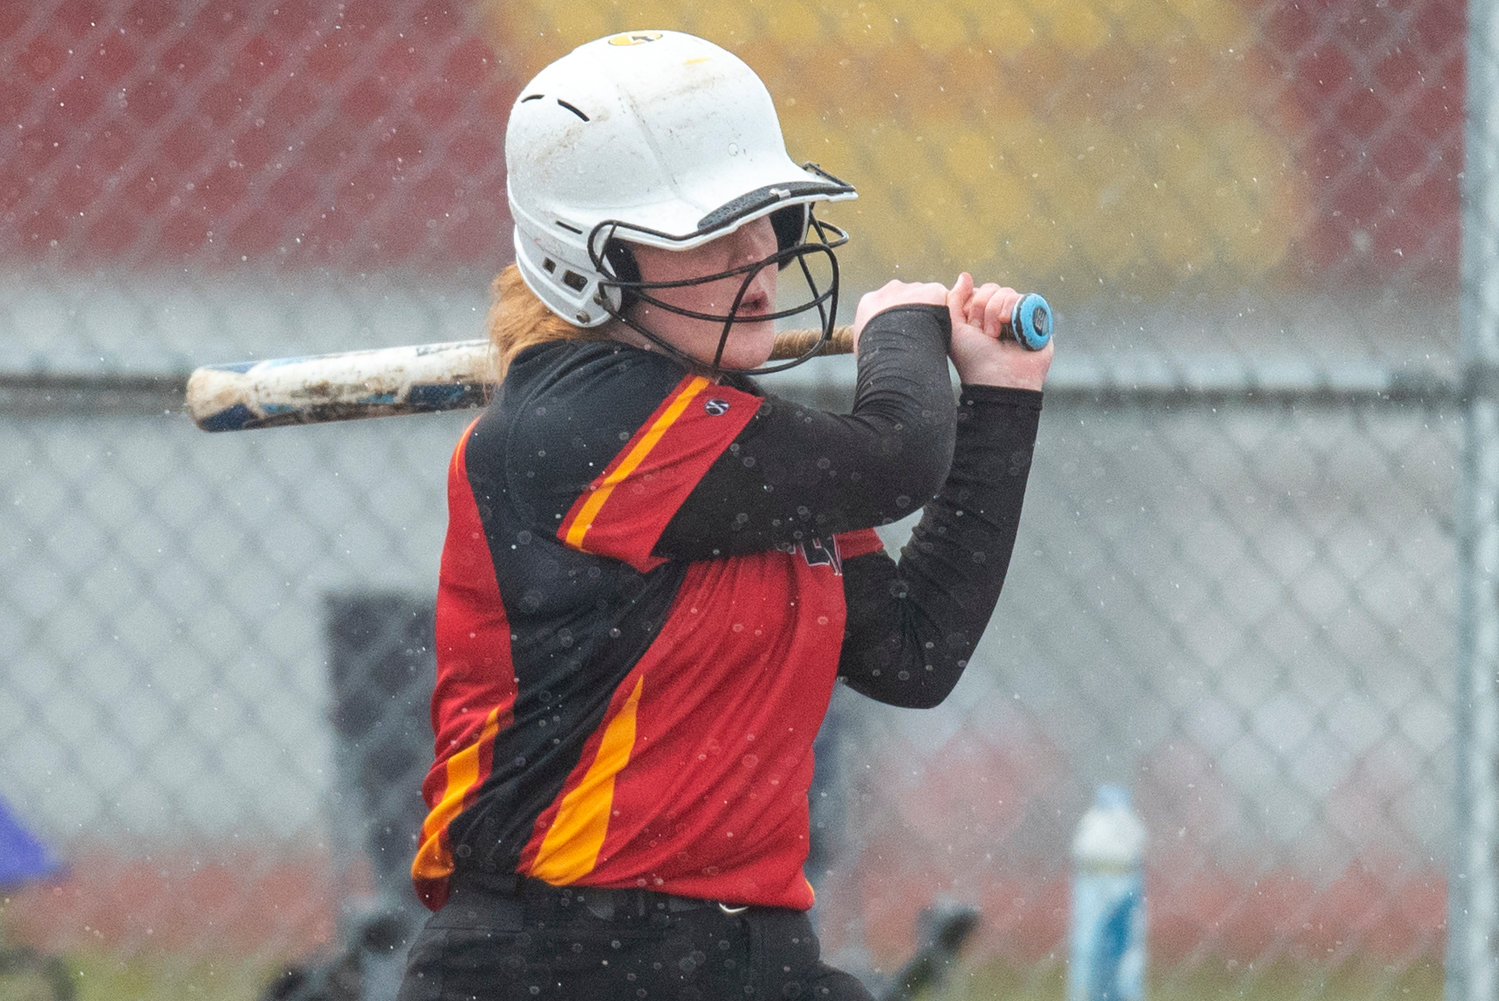 Winlock's Madison Rohman takes a cut at an Adna pitch during a home game on April 20.